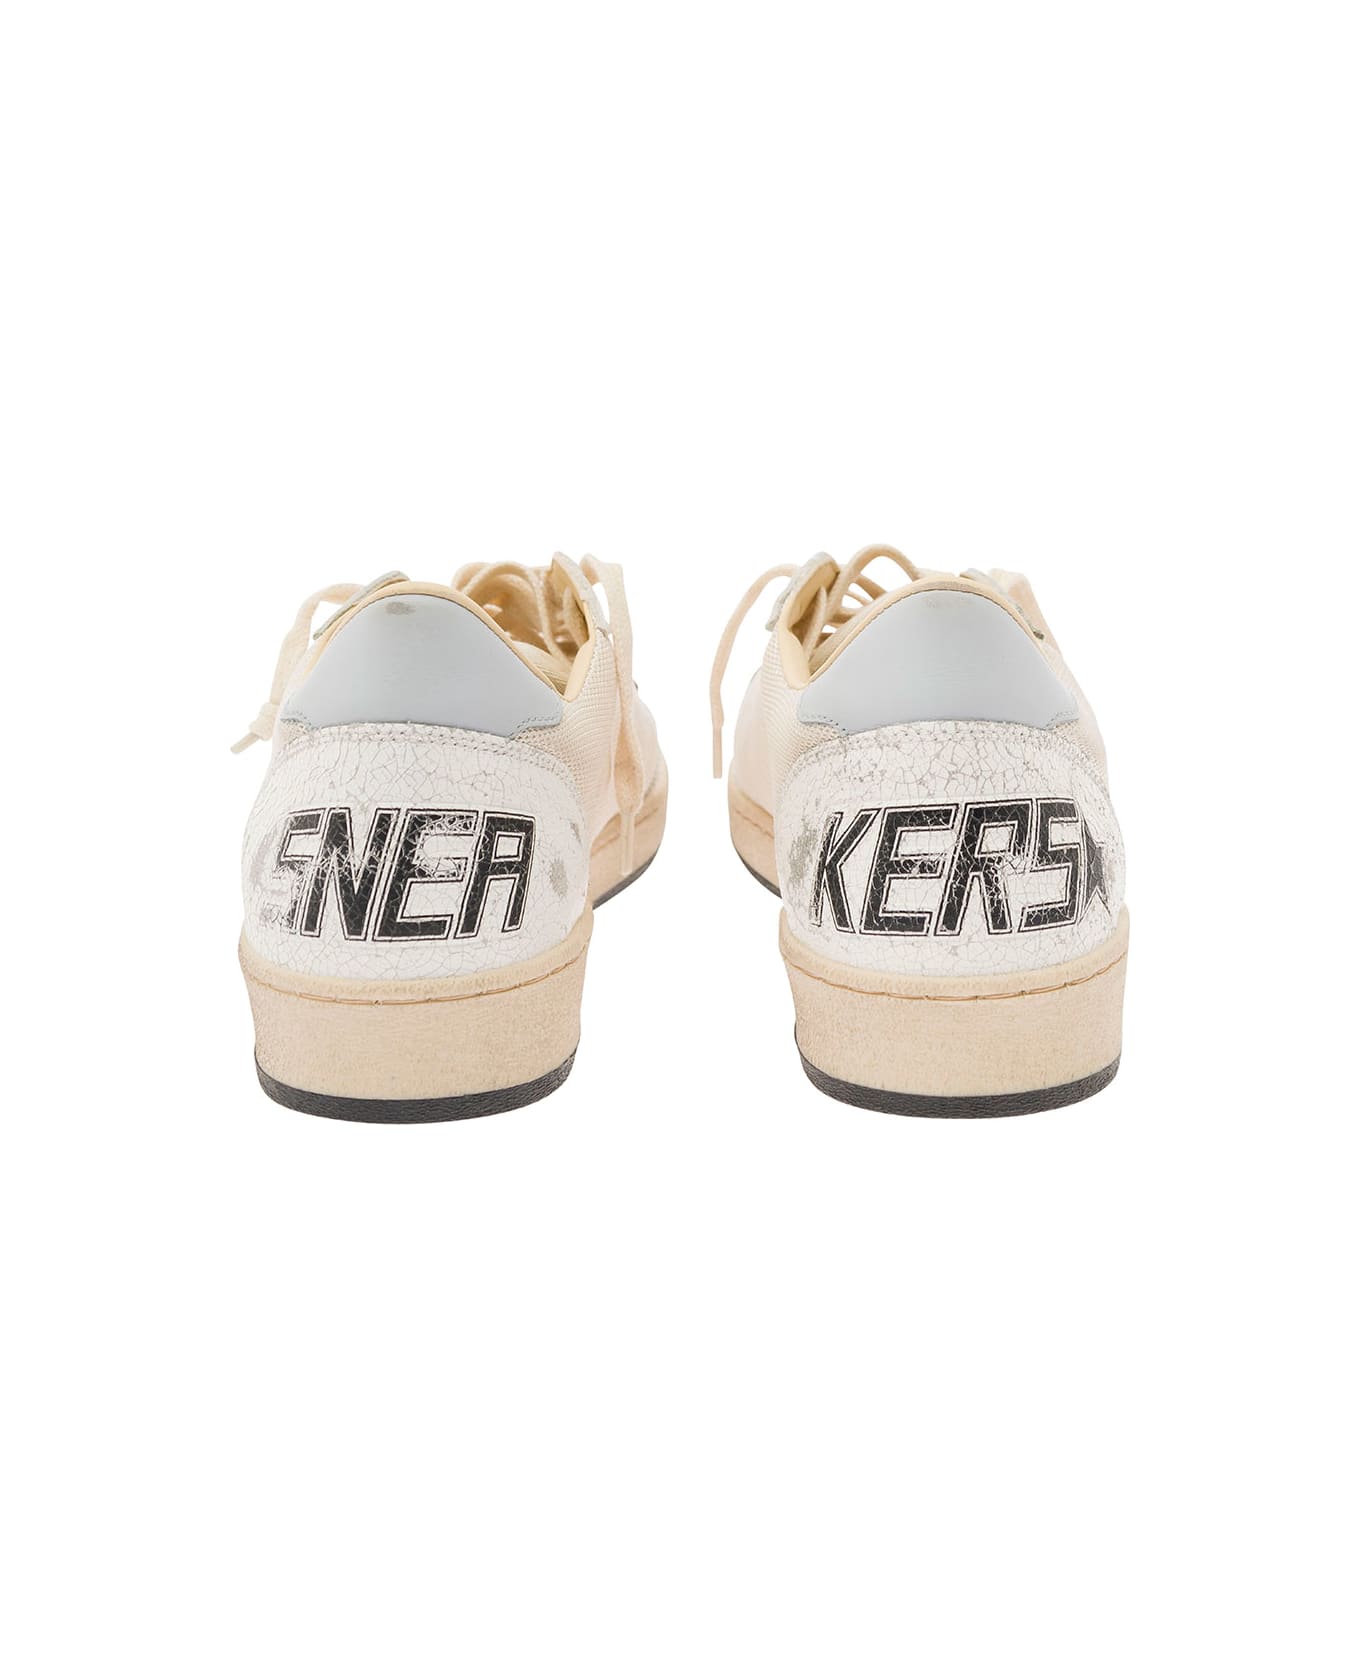 Golden Goose Ball Star Net Upper Crack Leather Toe And Spur Nylon Tongue Leather Star And Heel - Beige